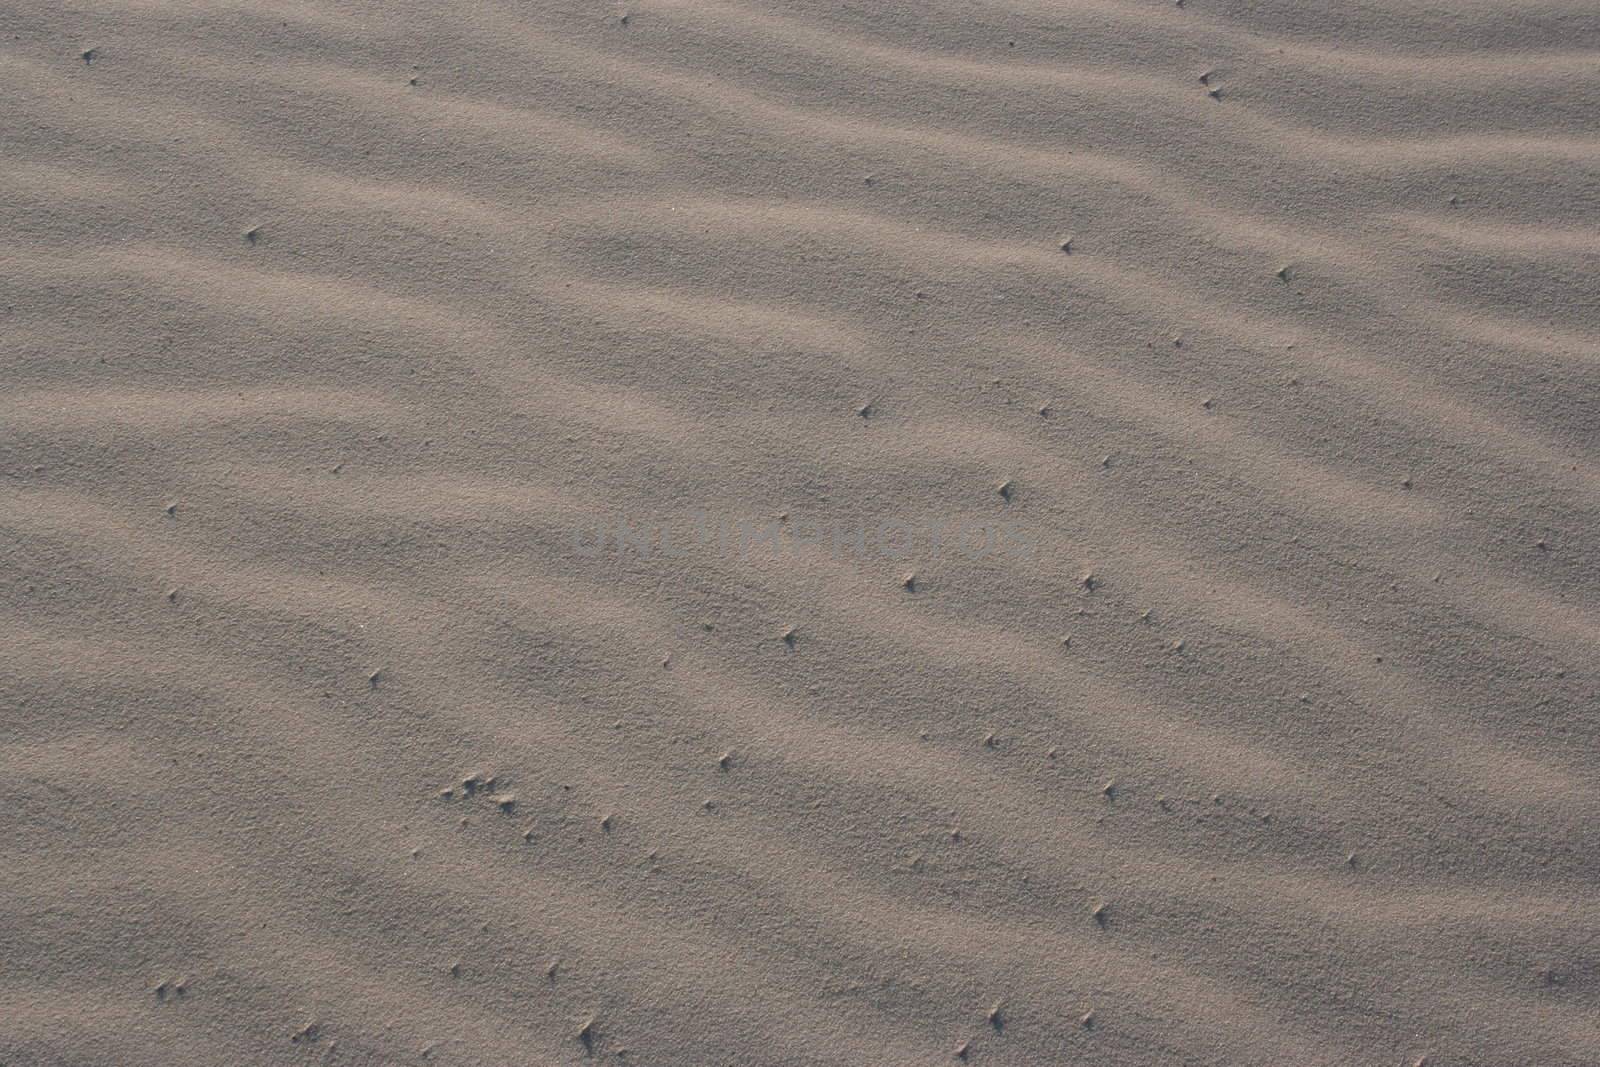 Some winded sand on the beach.  The ripples make nice little sand dunes.  The sand is very dry and soft.  This shot makes a great background pattern.